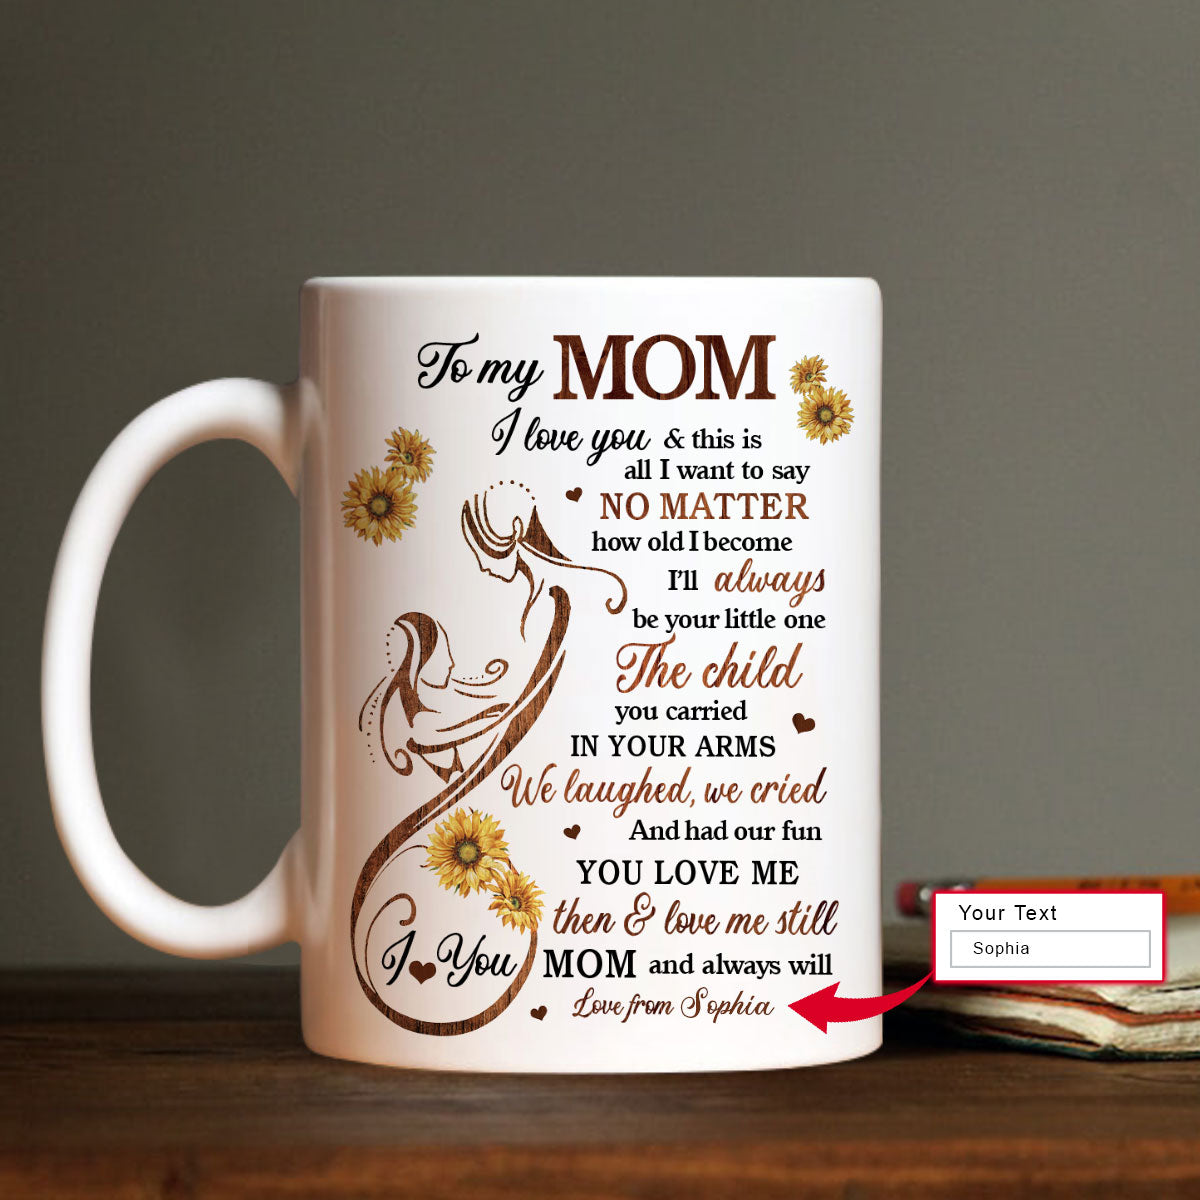 What I Love About Mom: Reasons Why I Love You Book | Fill In The Blank |  Personalized Mothers Day Gift From Daughter Or Son